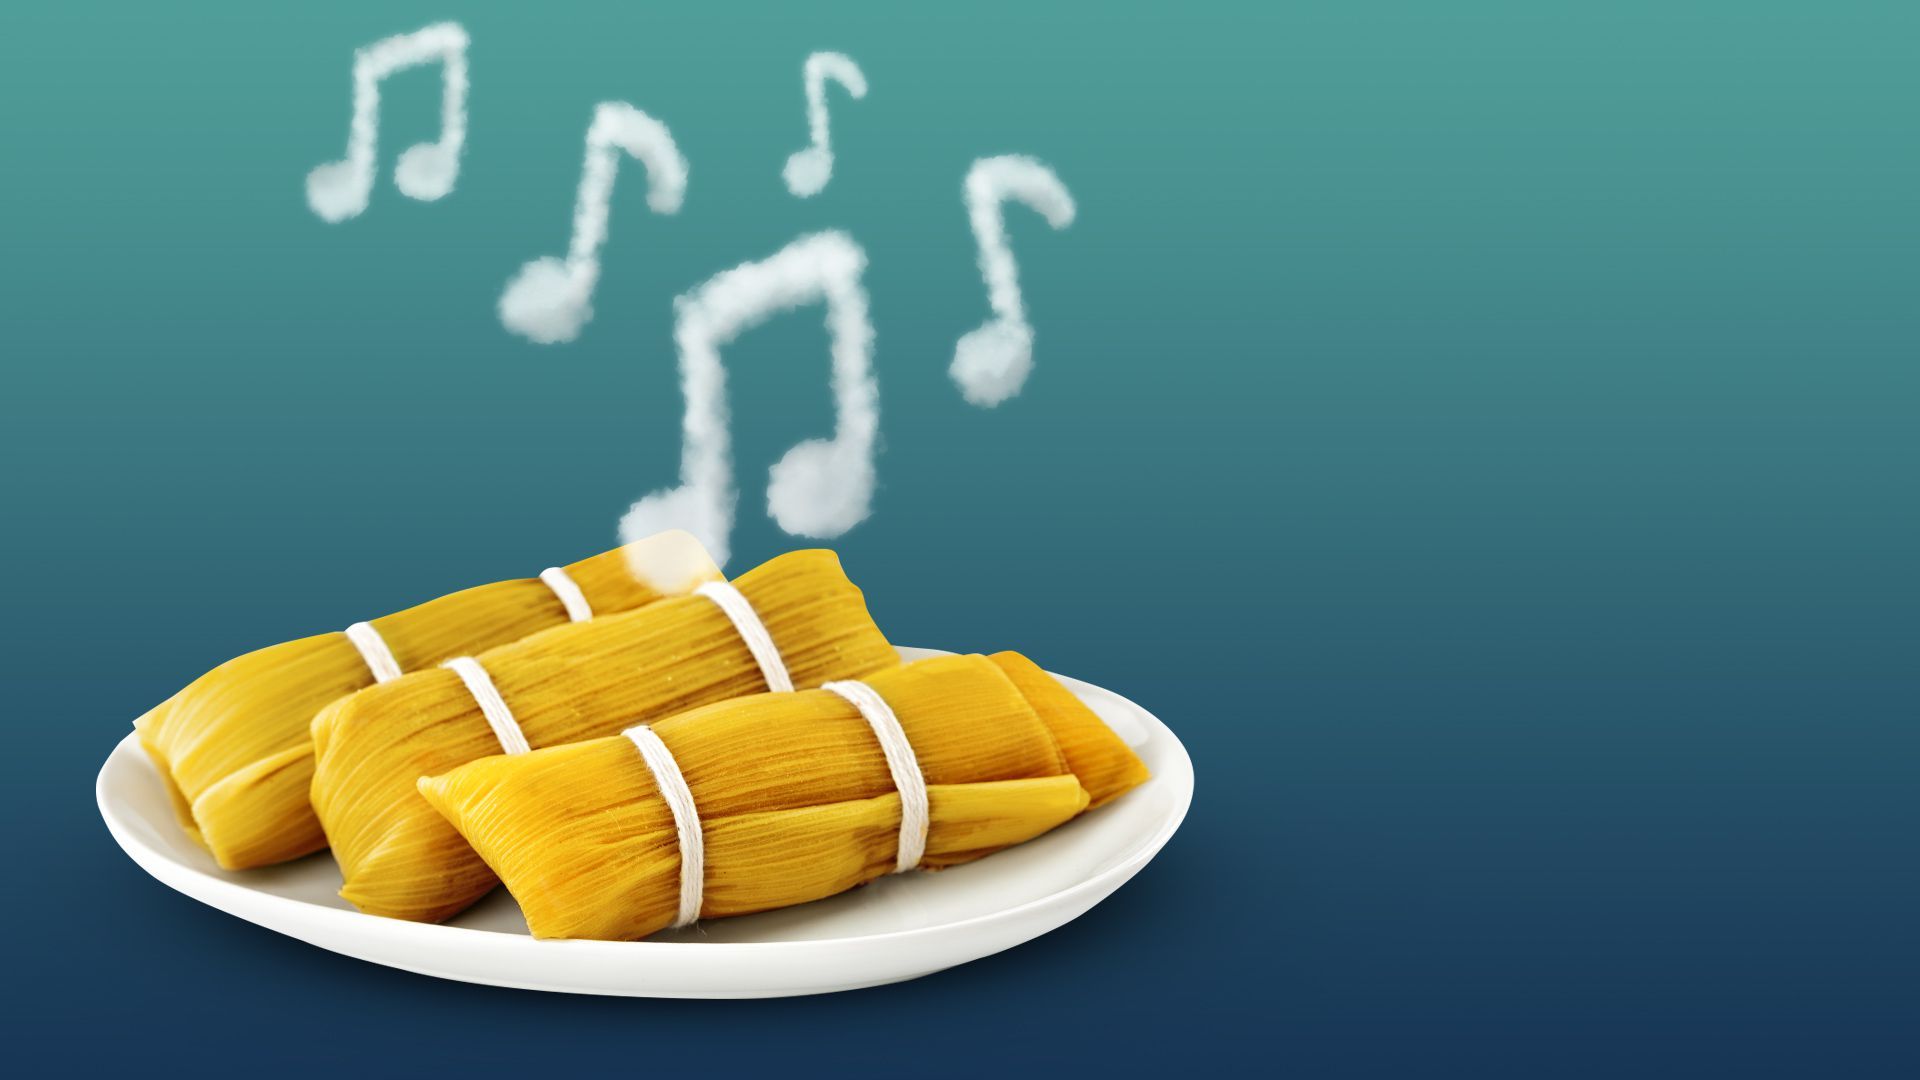 Illustration of a plate of tamales with steam in the shape of musical notes rising above it.   